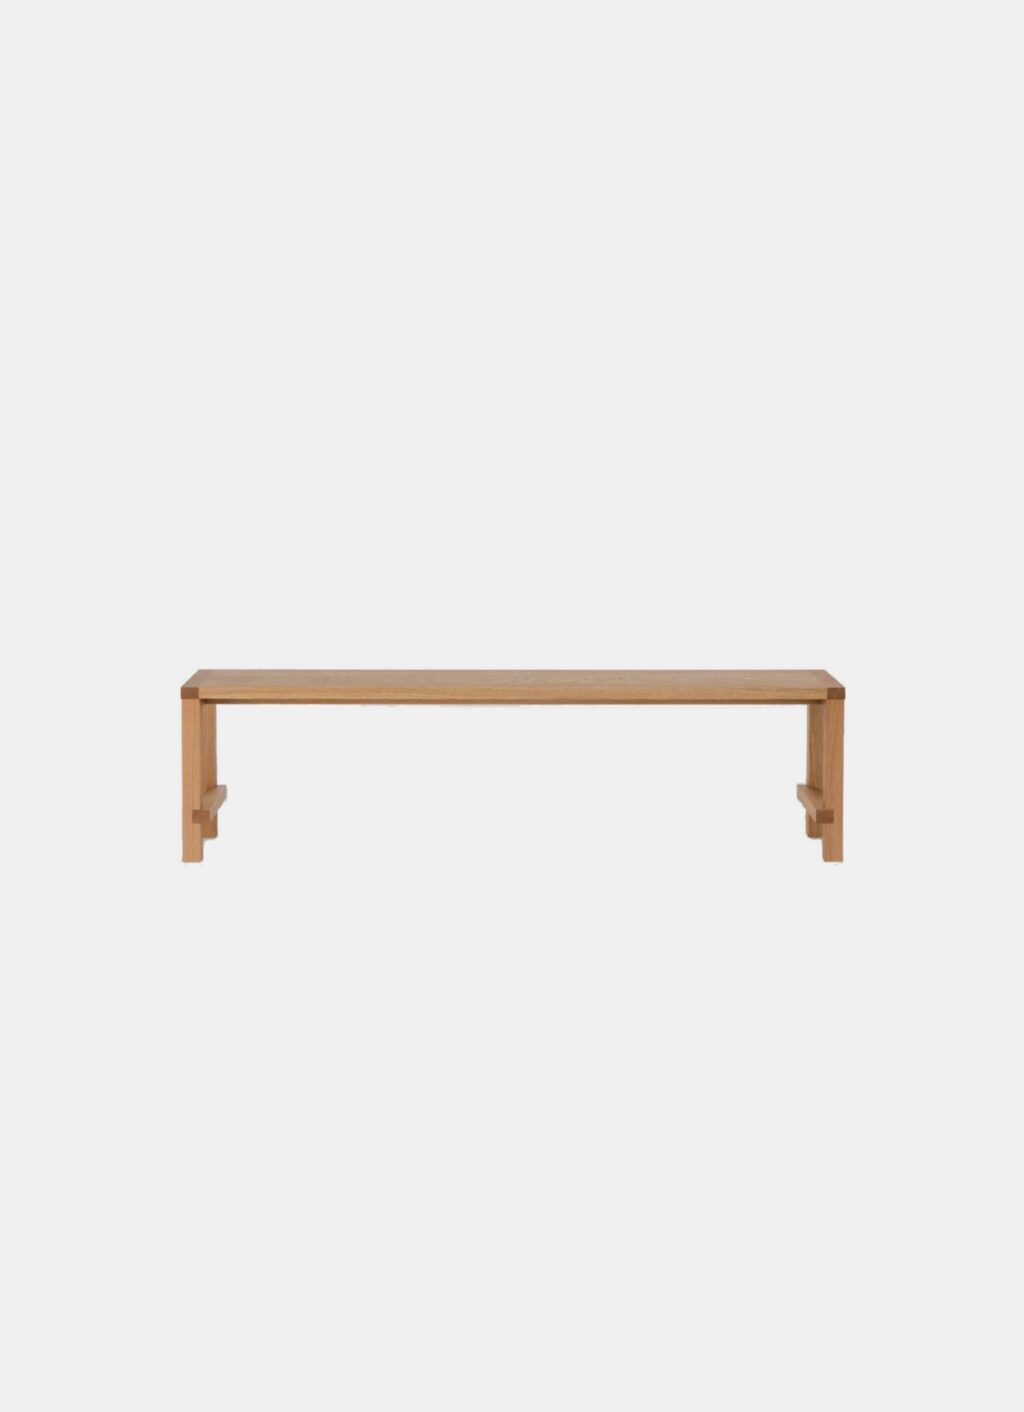 Another Country - Series Four - Bench - Oak -139cm - SHOWROOM DISPLAY